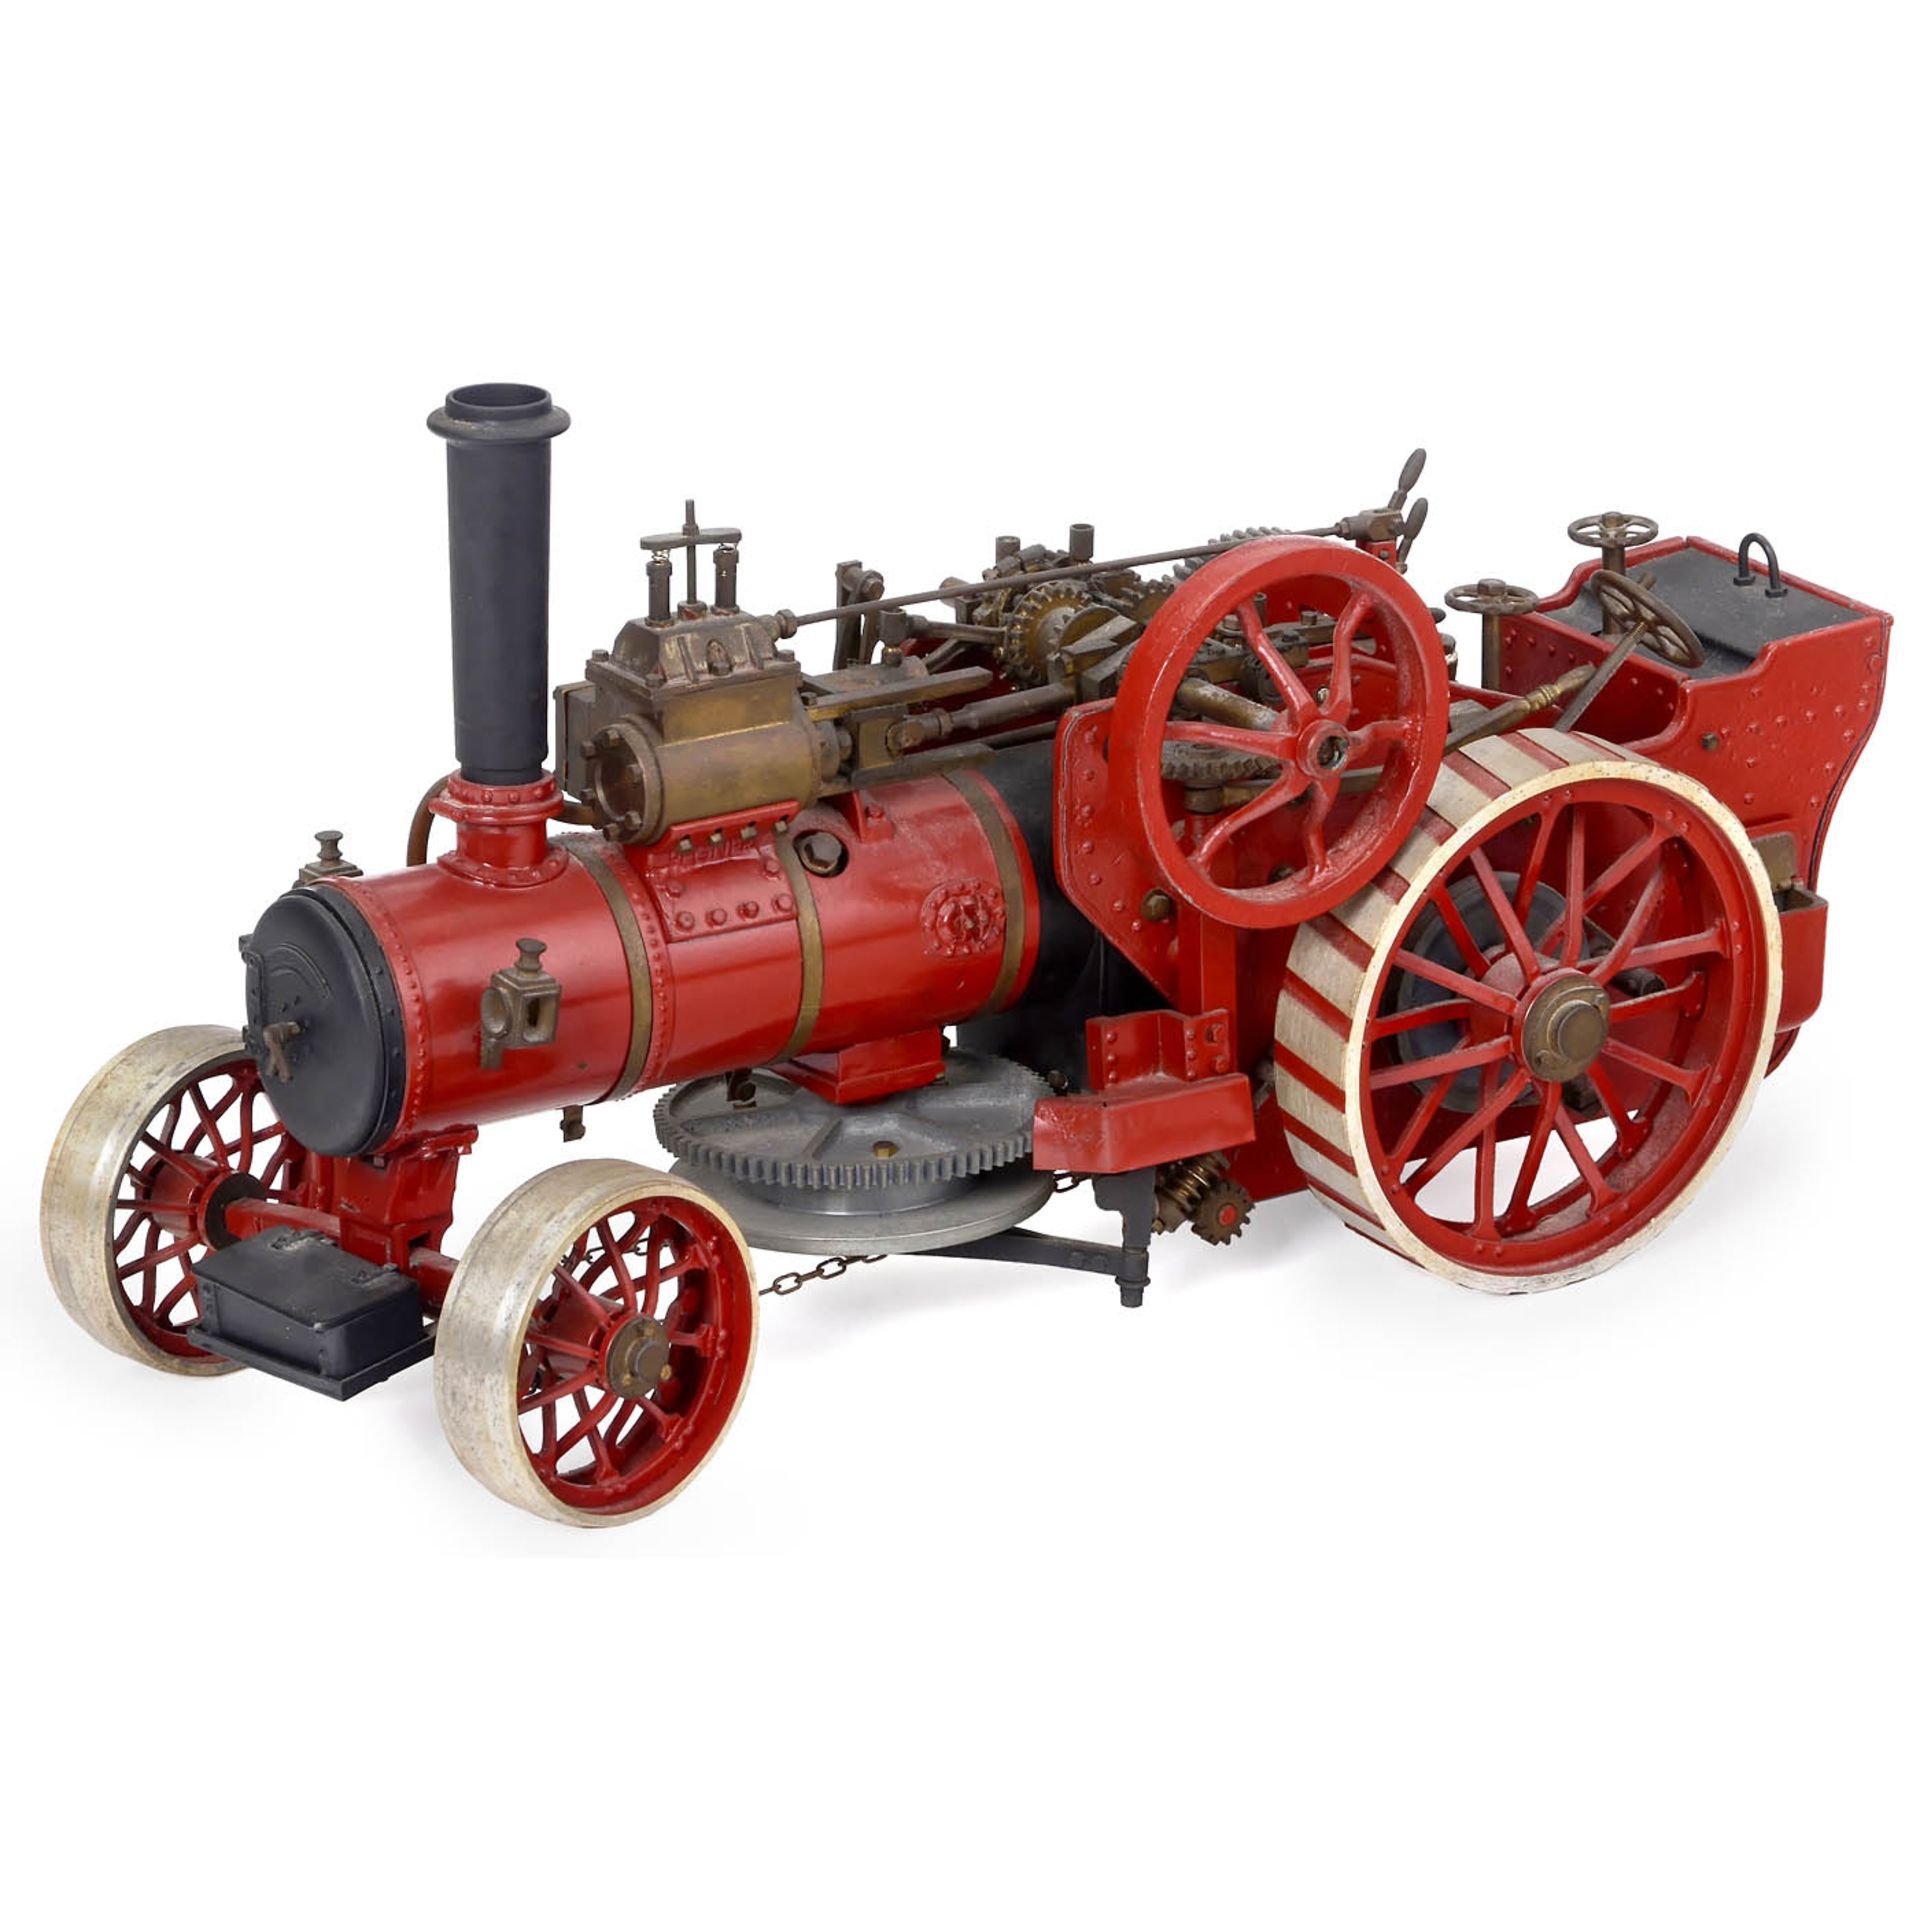 ¾-Inch Scale Model of the Live-Steam Traction Engine "Napoleon" by Fowler, c. 1975